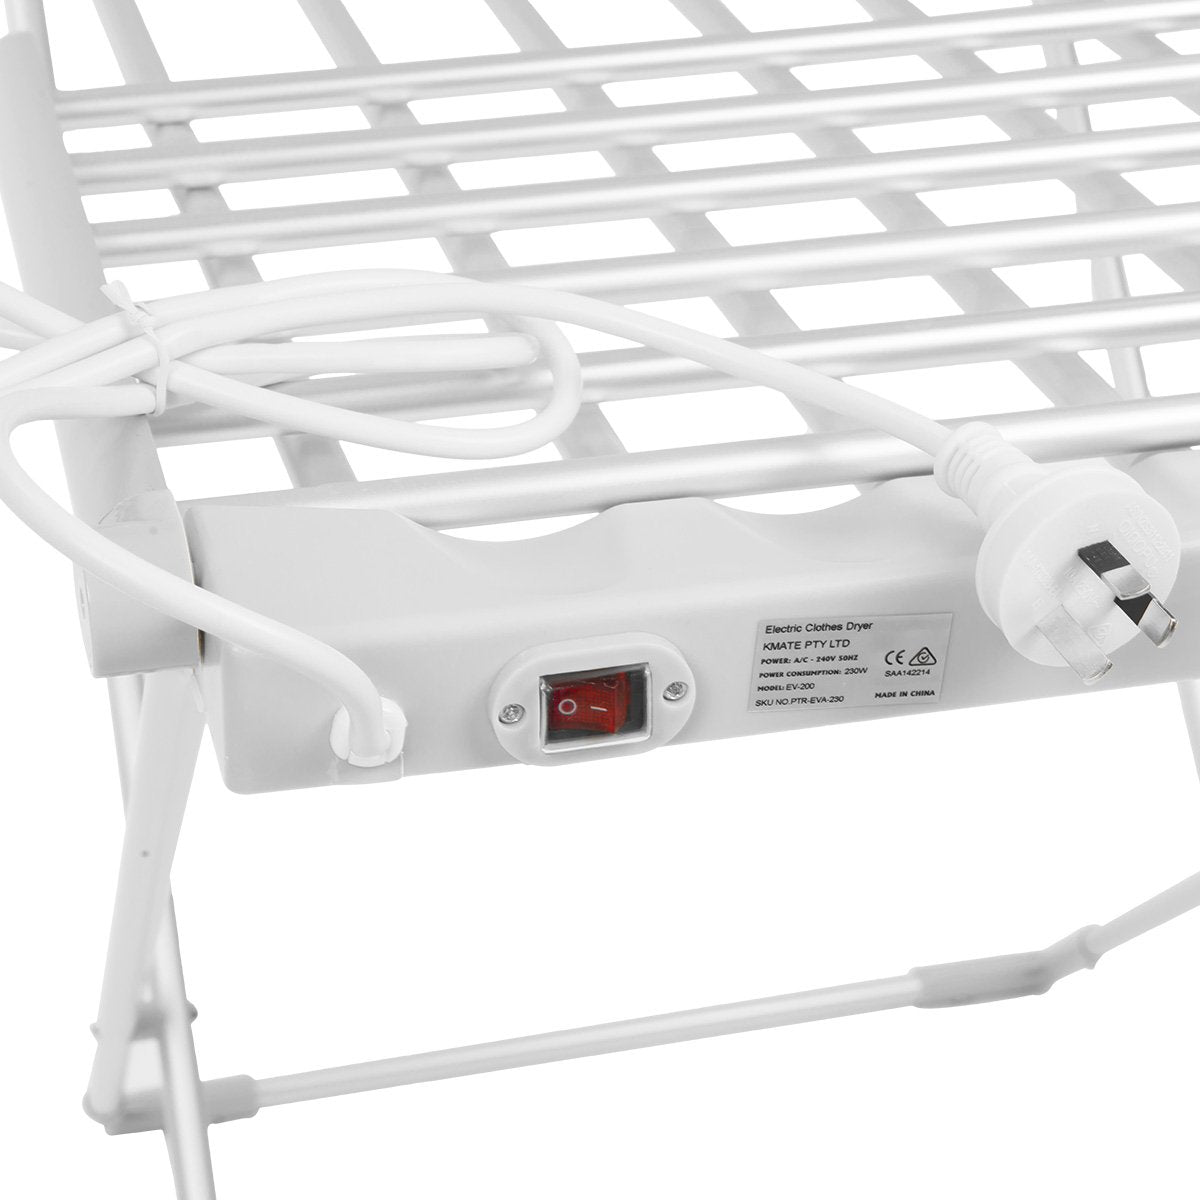 Pronti Heated Towel Clothes Rack Dryer Warmer Rack Airer Heat Line Hanger Laundry - SILBERSHELL